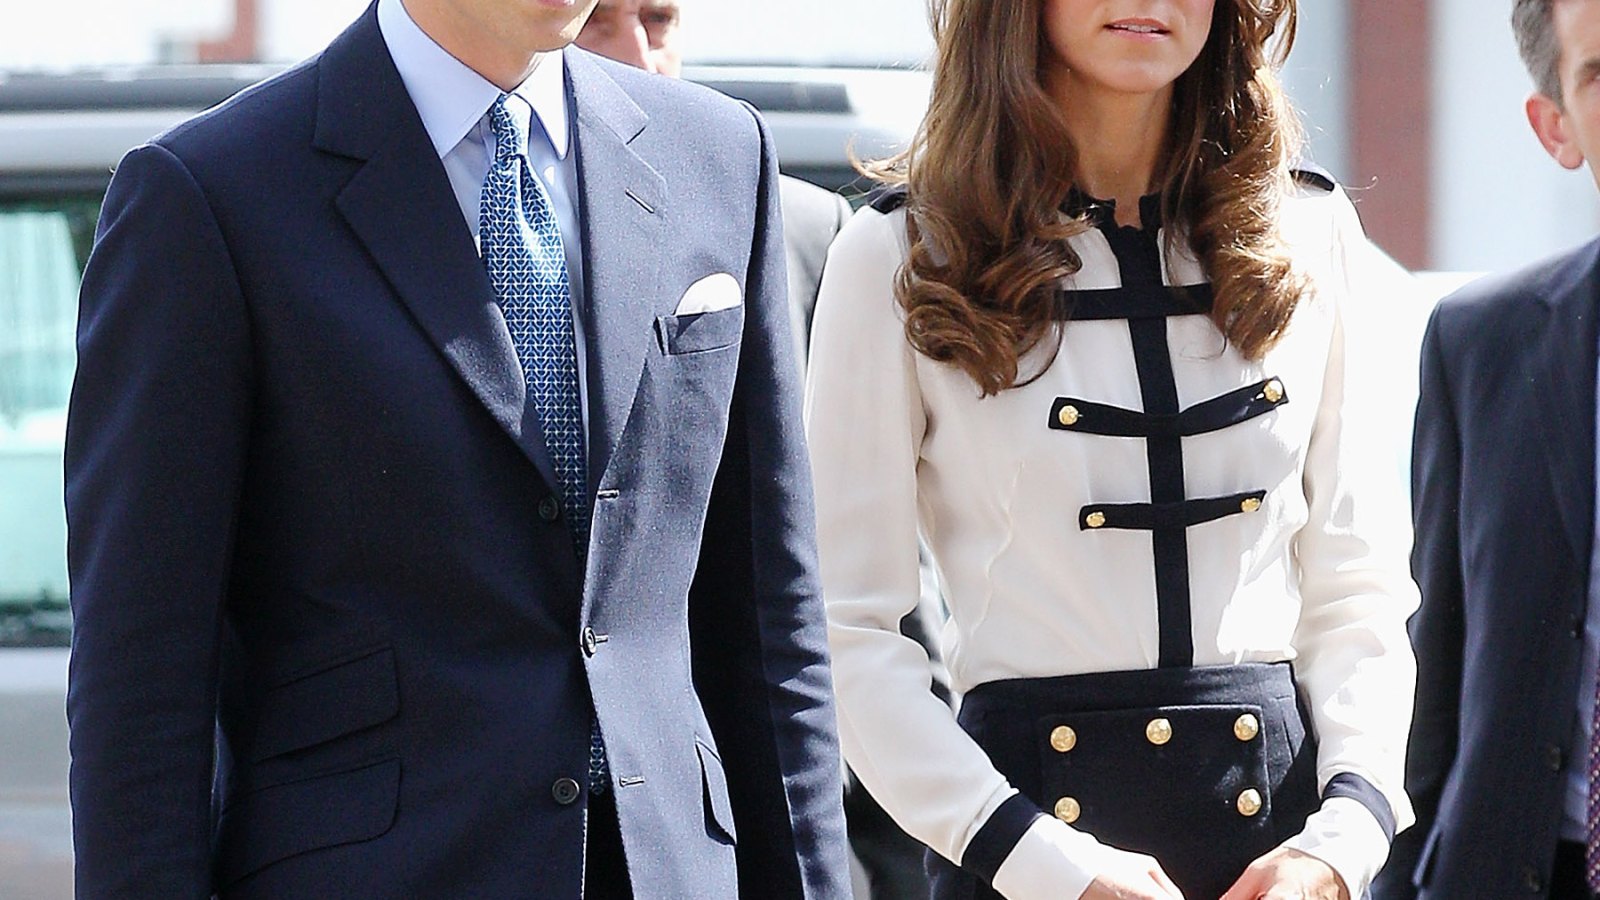 Prince William and Kate Middleton on August 19, 2011 in England